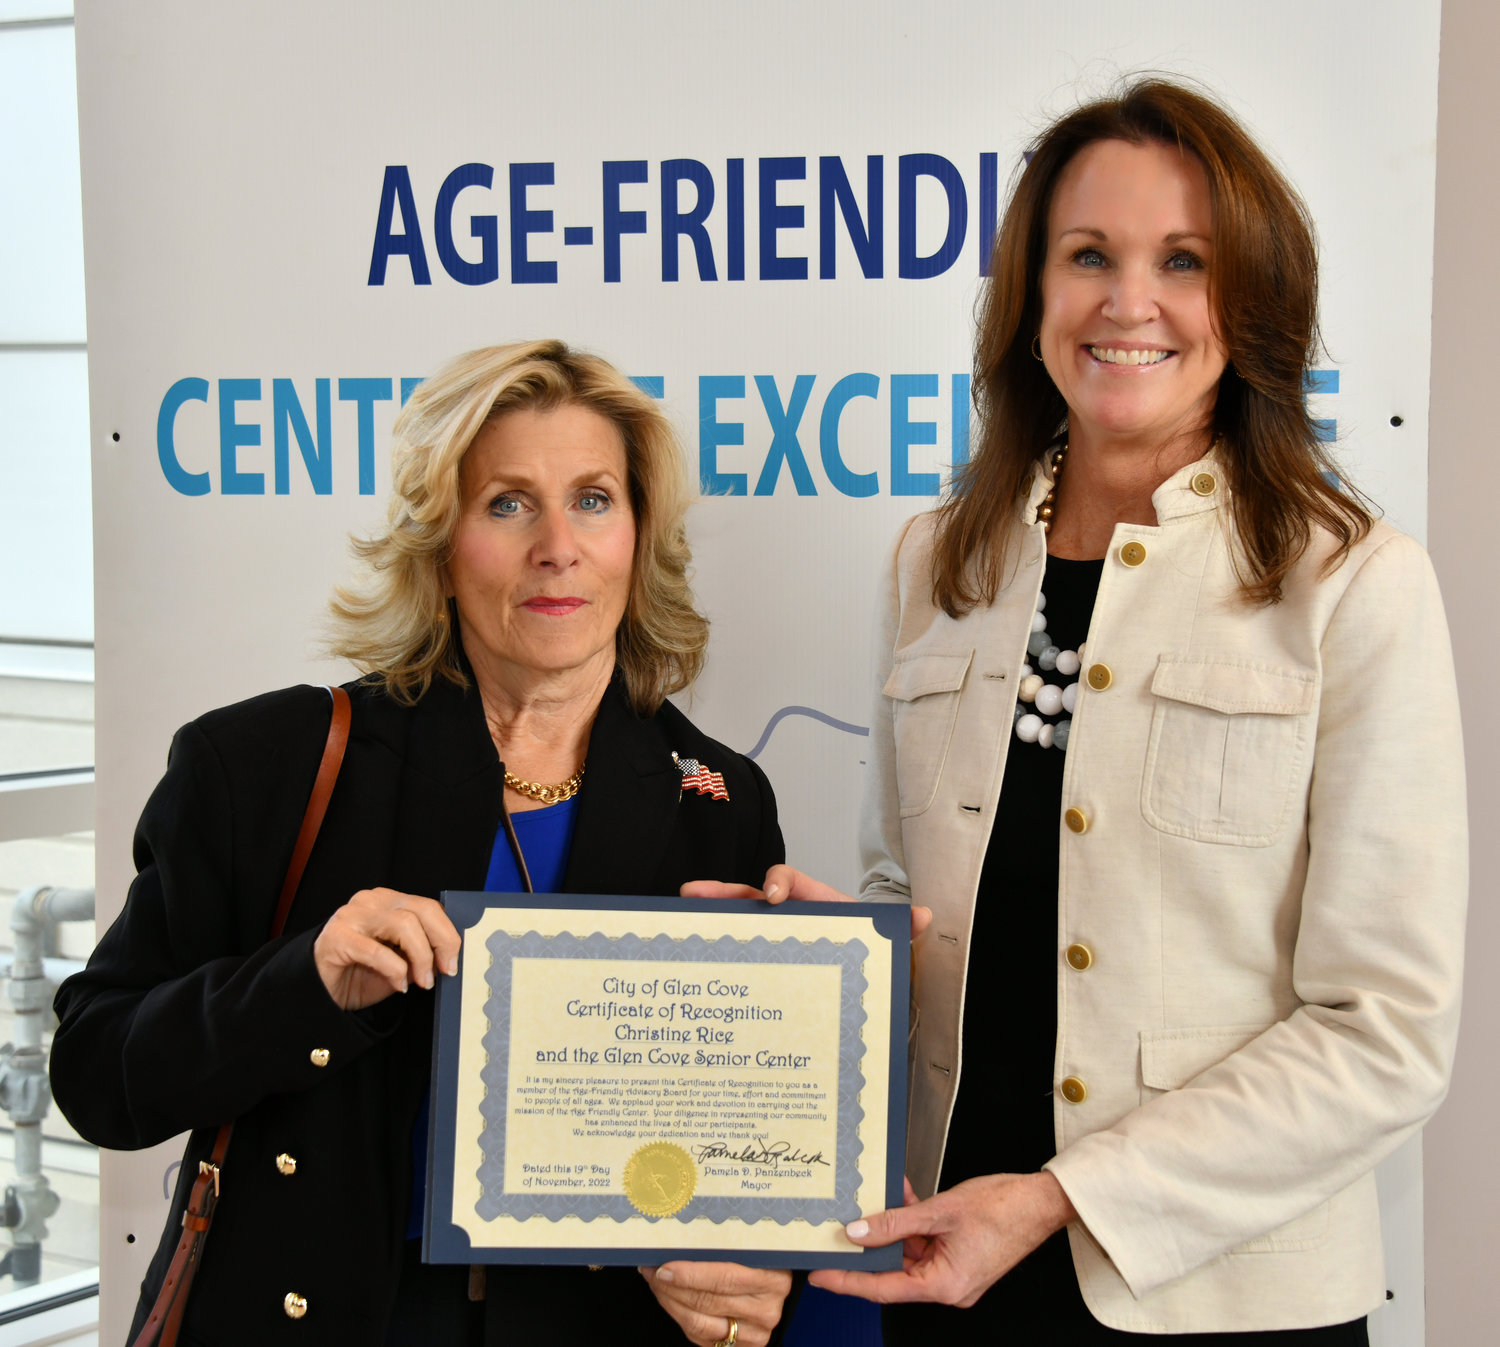 Mayor Pamela Panzenbeck, left, presented a citation to Christine Rice, executive director of the Glen Cove Senior Center for her role in making the city welcoming for seniors.